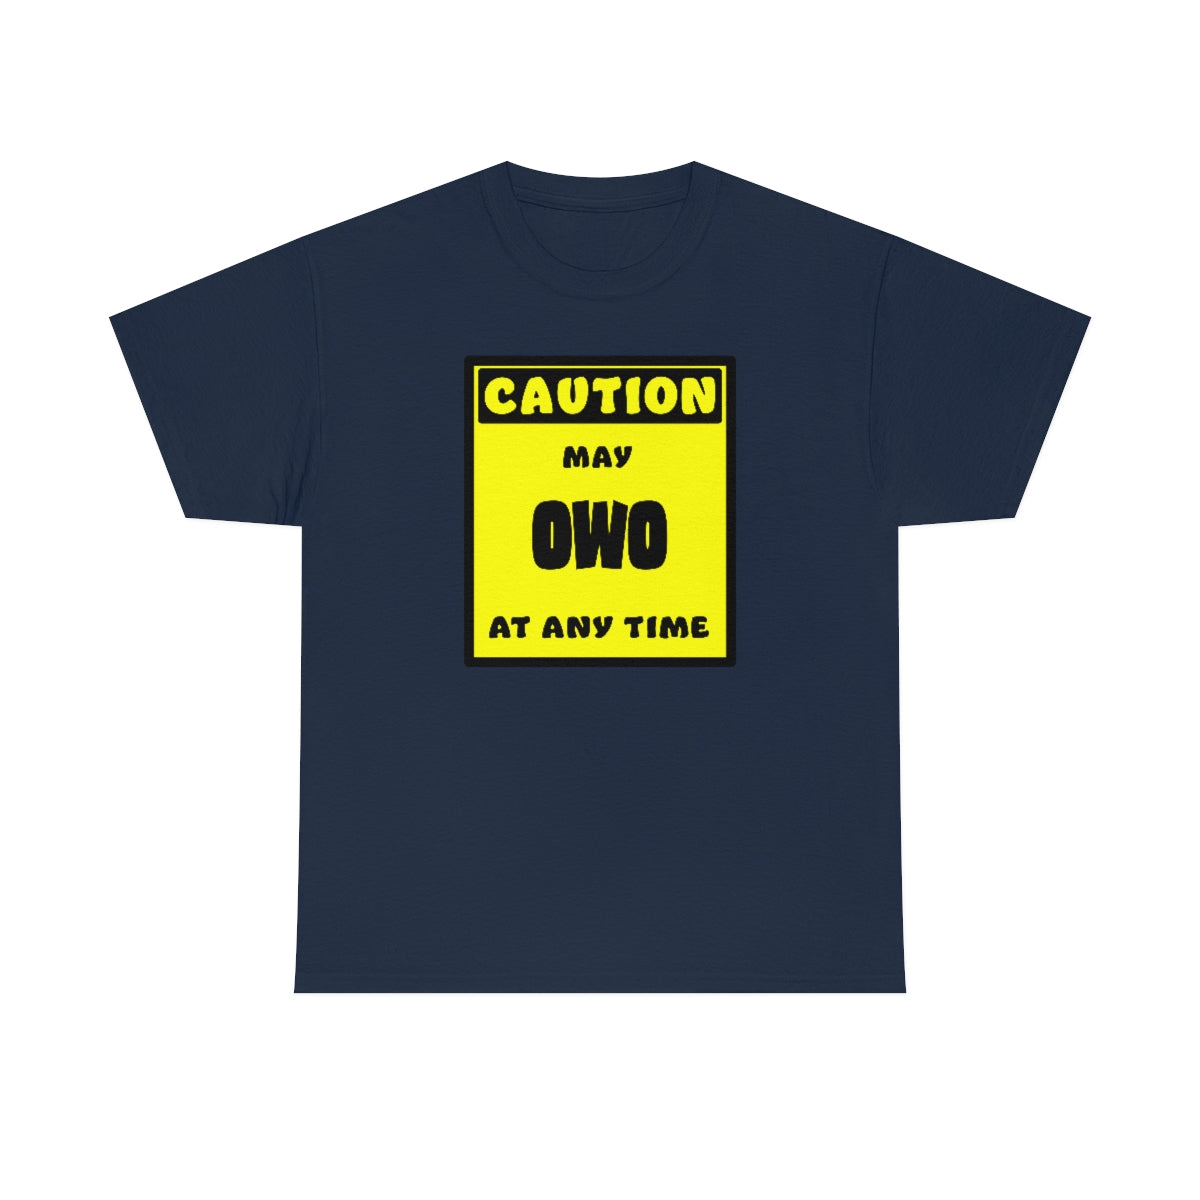 CAUTION! May OWO at any time! - T-Shirt T-Shirt AFLT-Whootorca Navy Blue S 